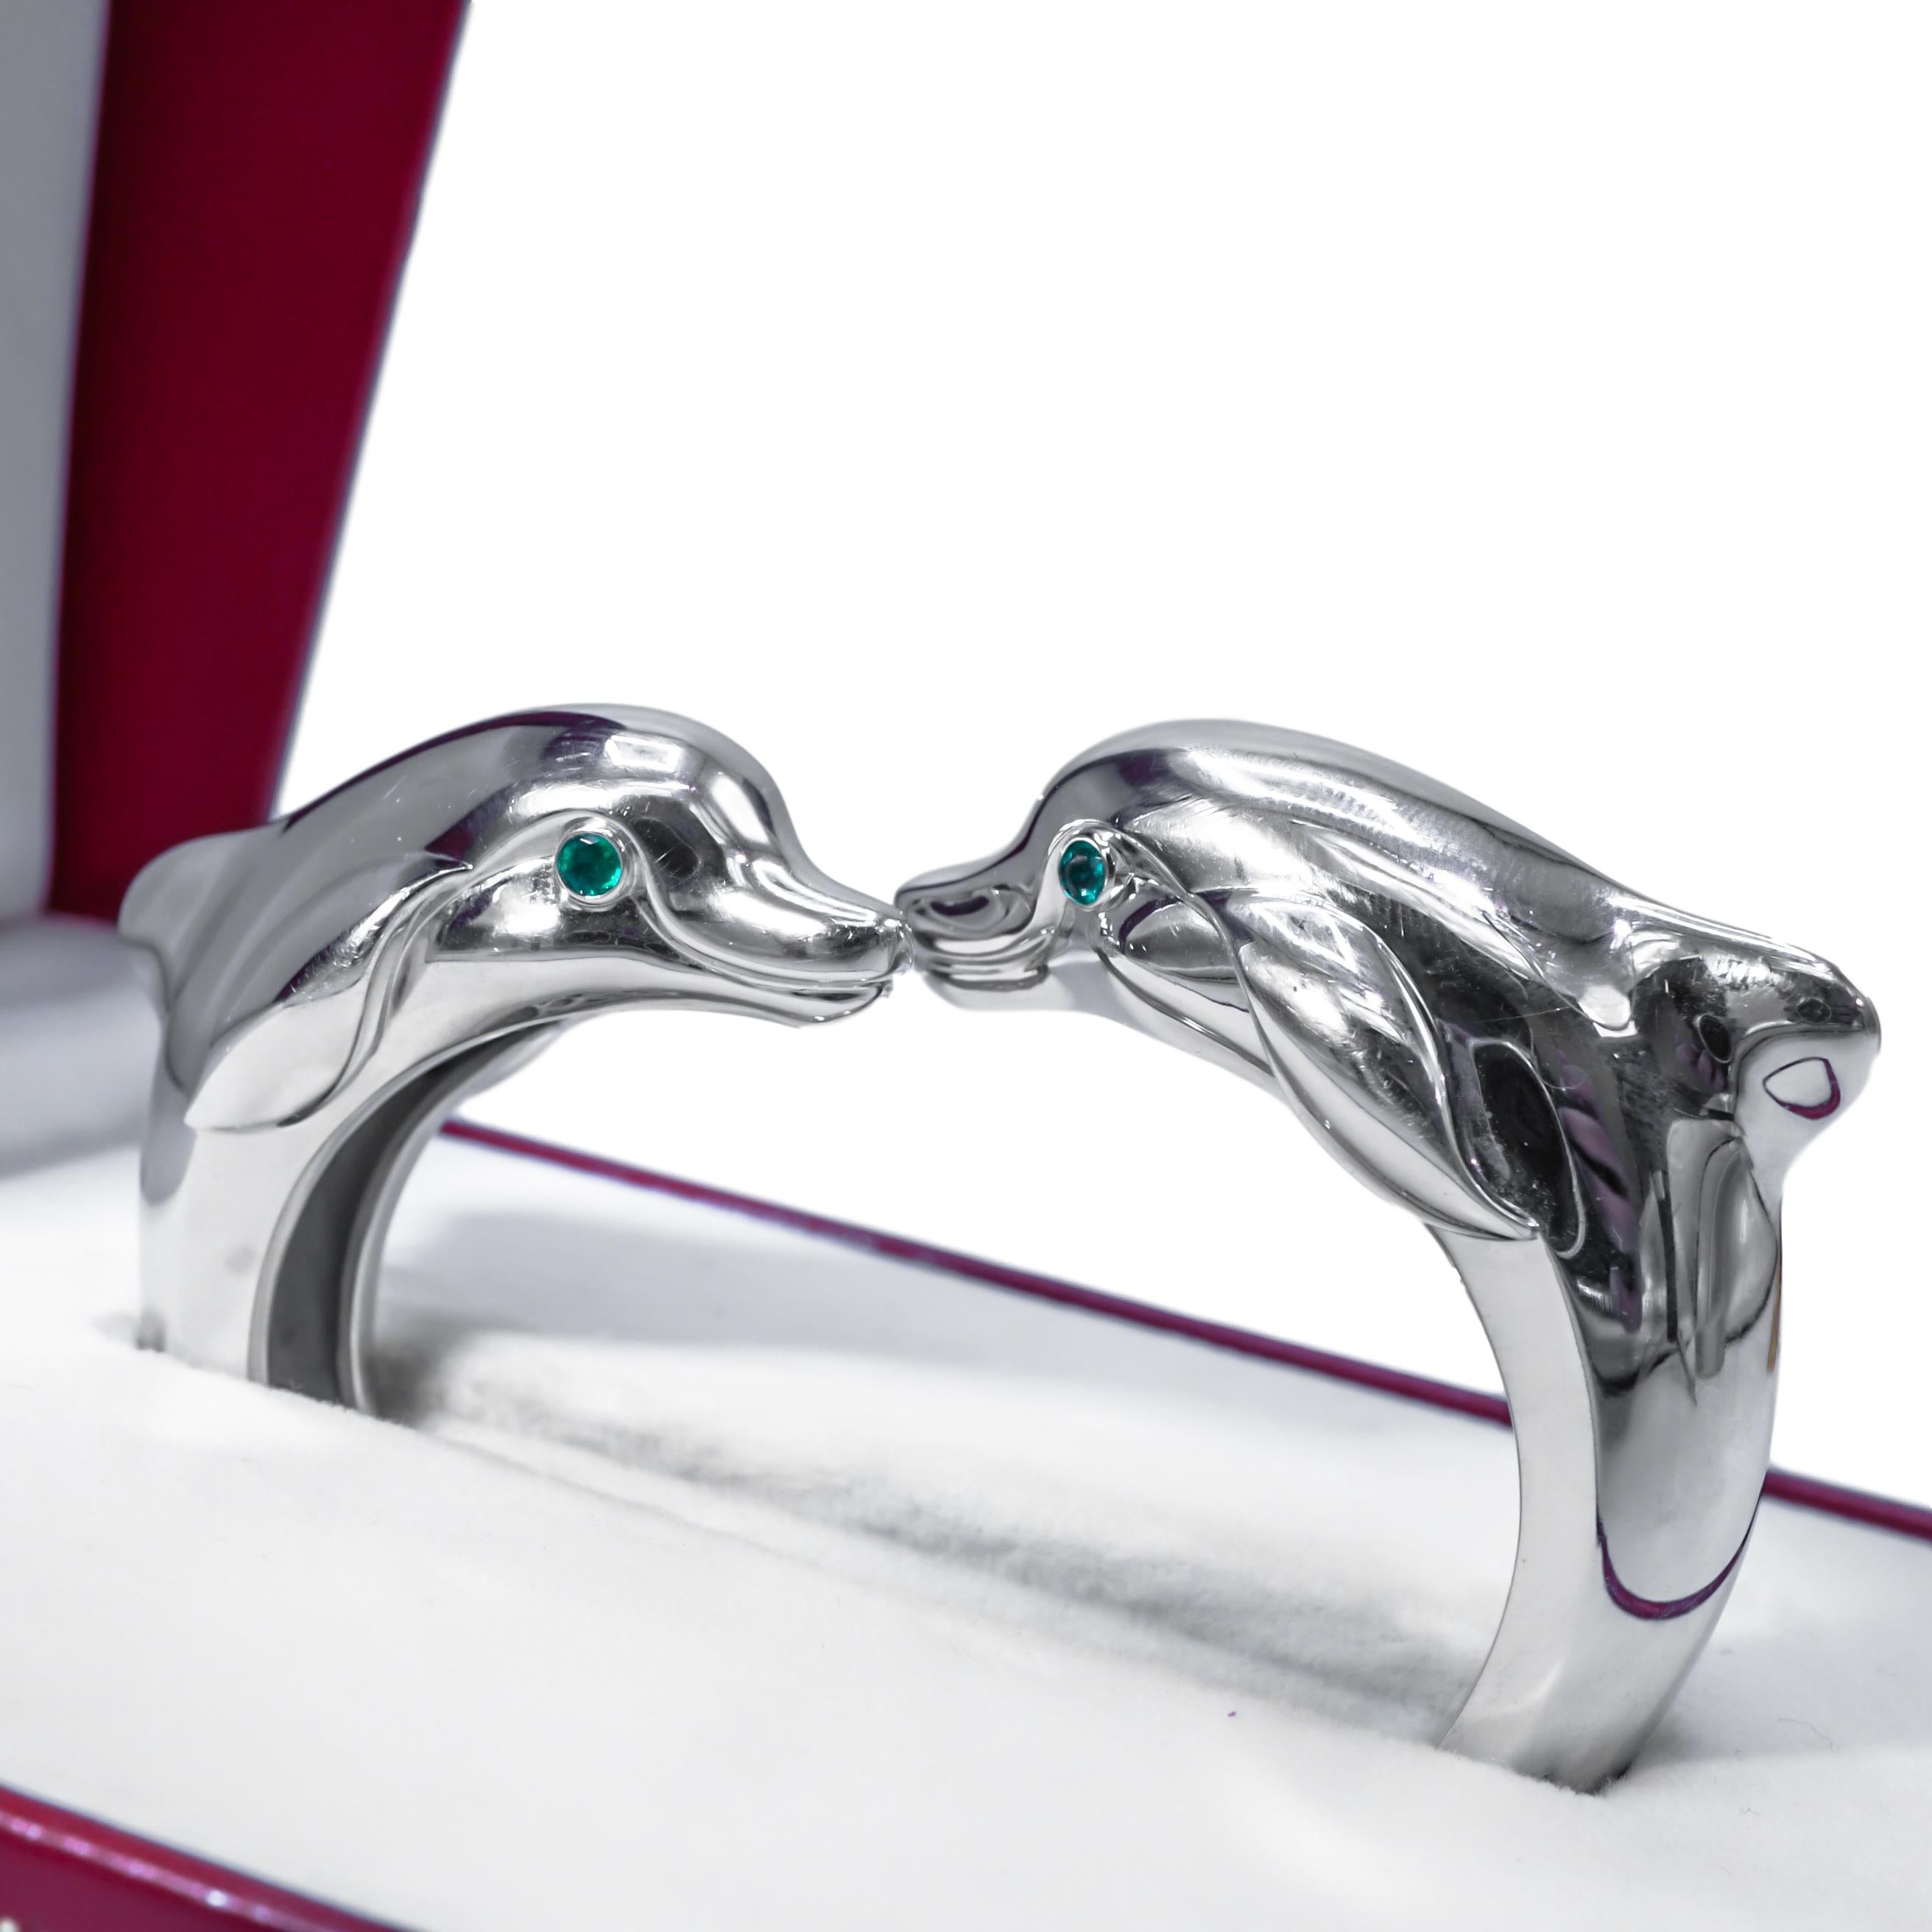 White Gold Dolphin Bangle Bracelet, Cartier
18 kt, the polished bangle designed as a pair of confronting dolphin heads, accented by emerald eyes, signed Cartier, no. 753 749, approximately 59.2 dwts. Inner circle 6 1/8 inches. With signed box.